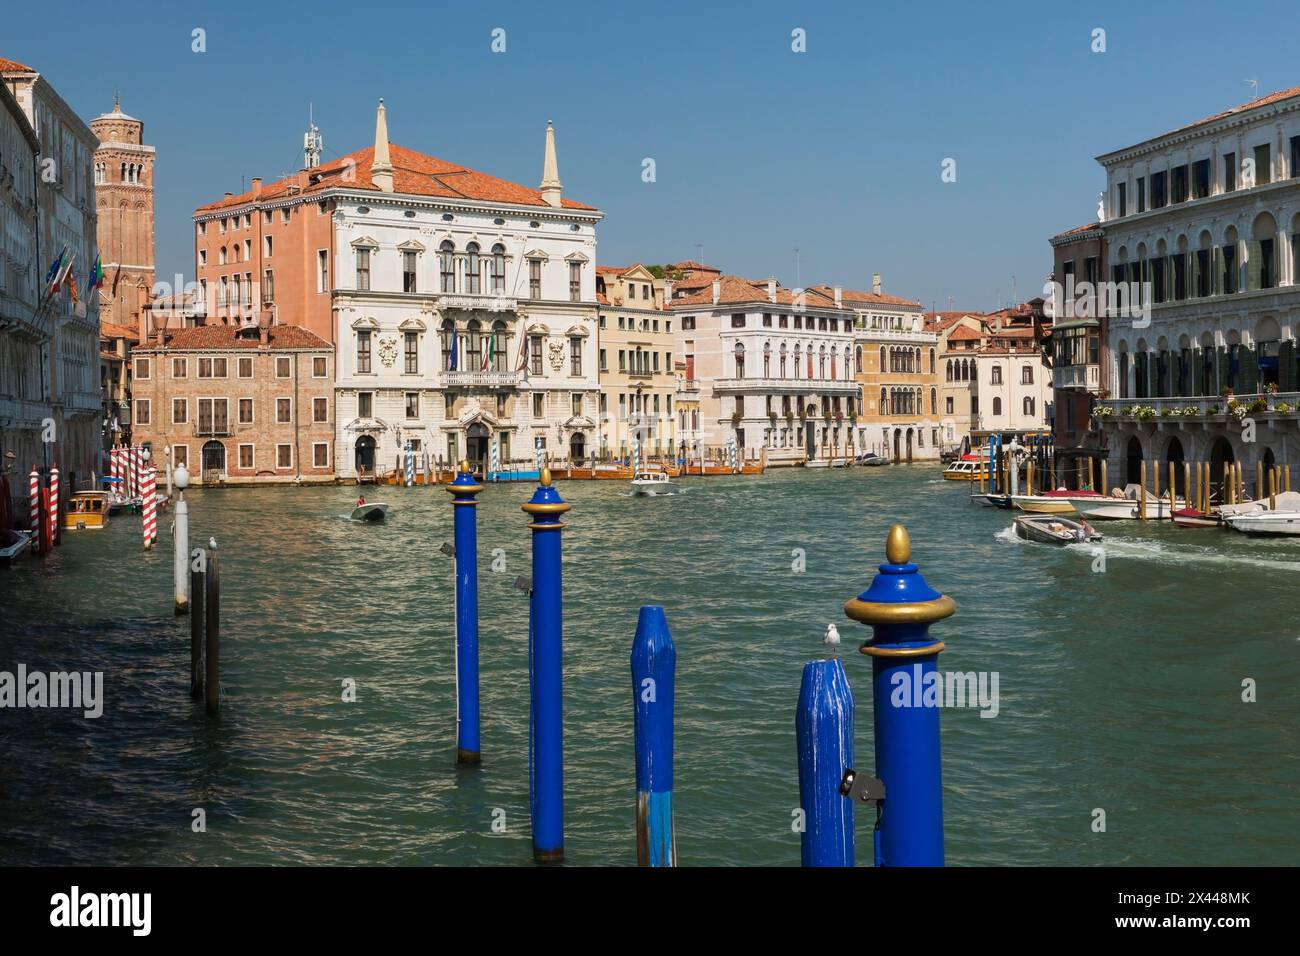 Blue mooring posts and water taxis on Grand canal with Renaissance architectural style residential palace buildings, San Polo district, Venice Stock Photo